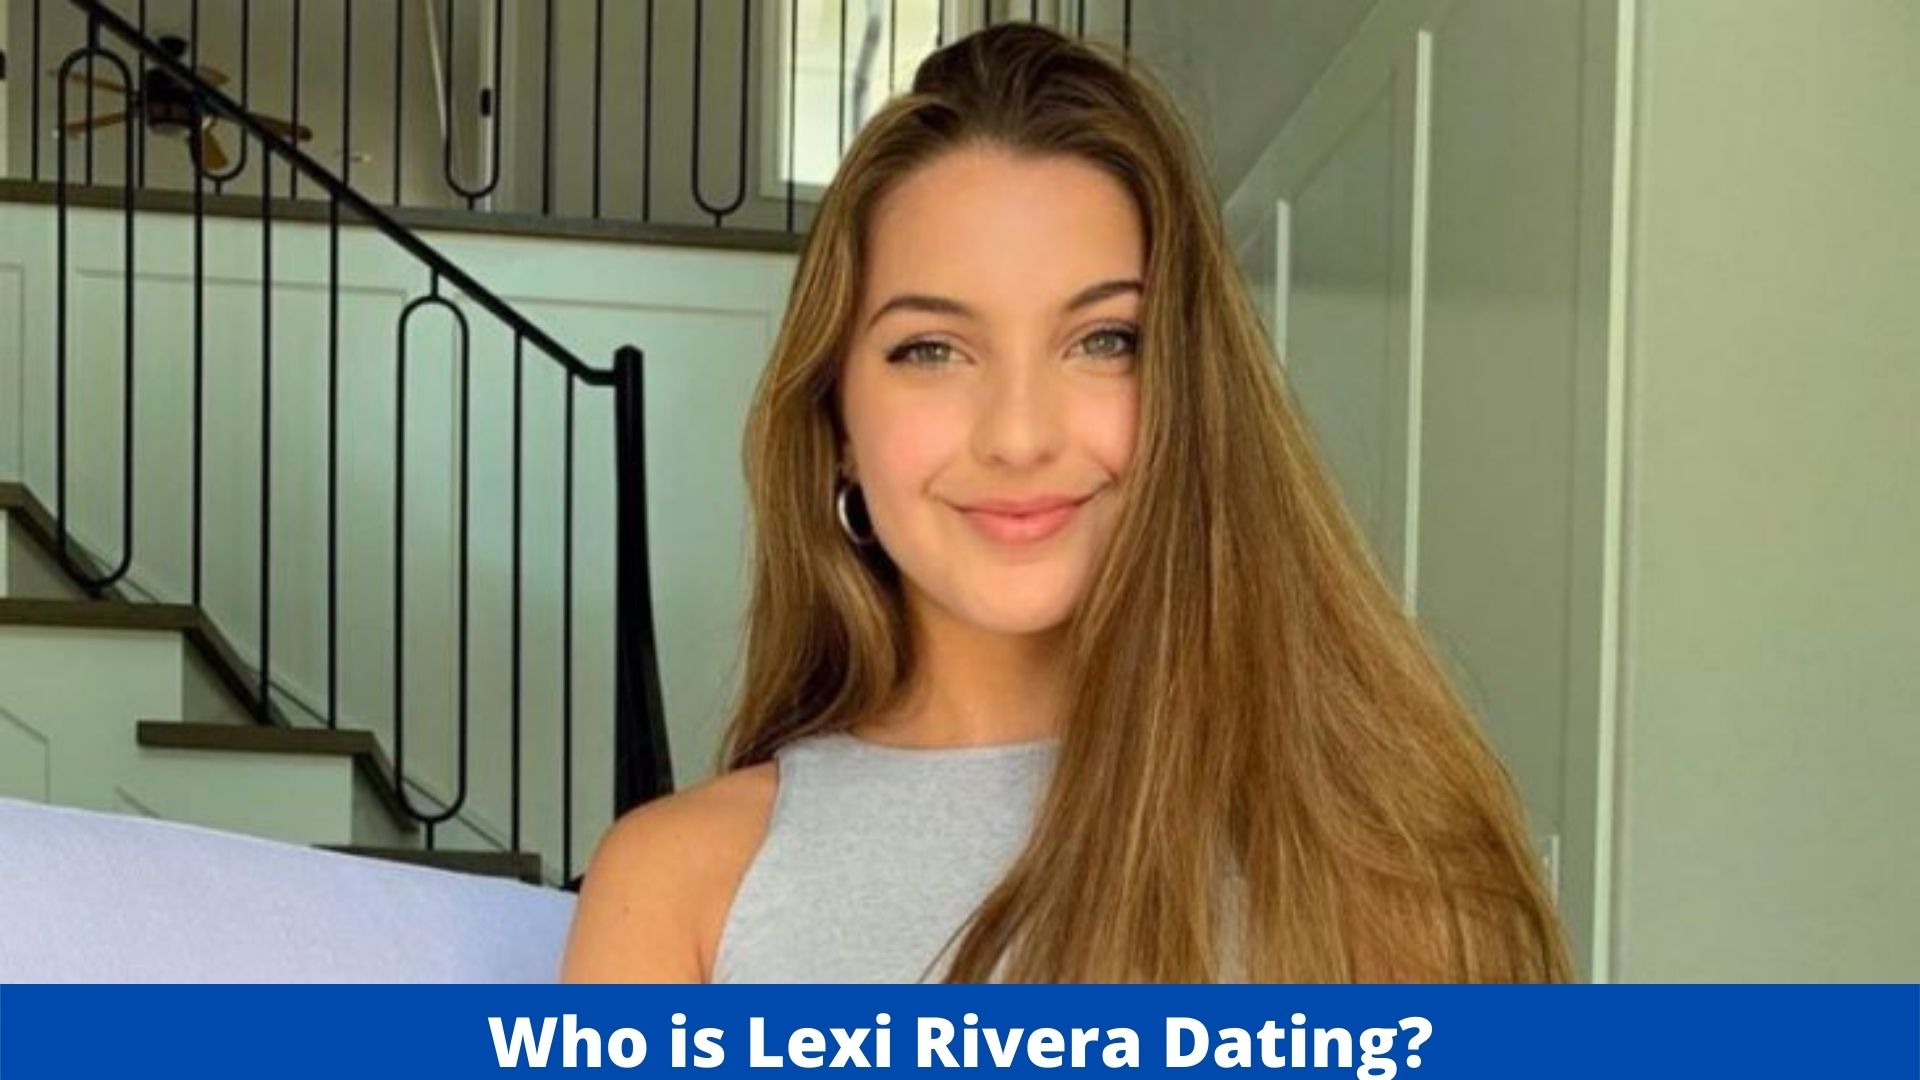 Who is Lexi Rivera Dating?